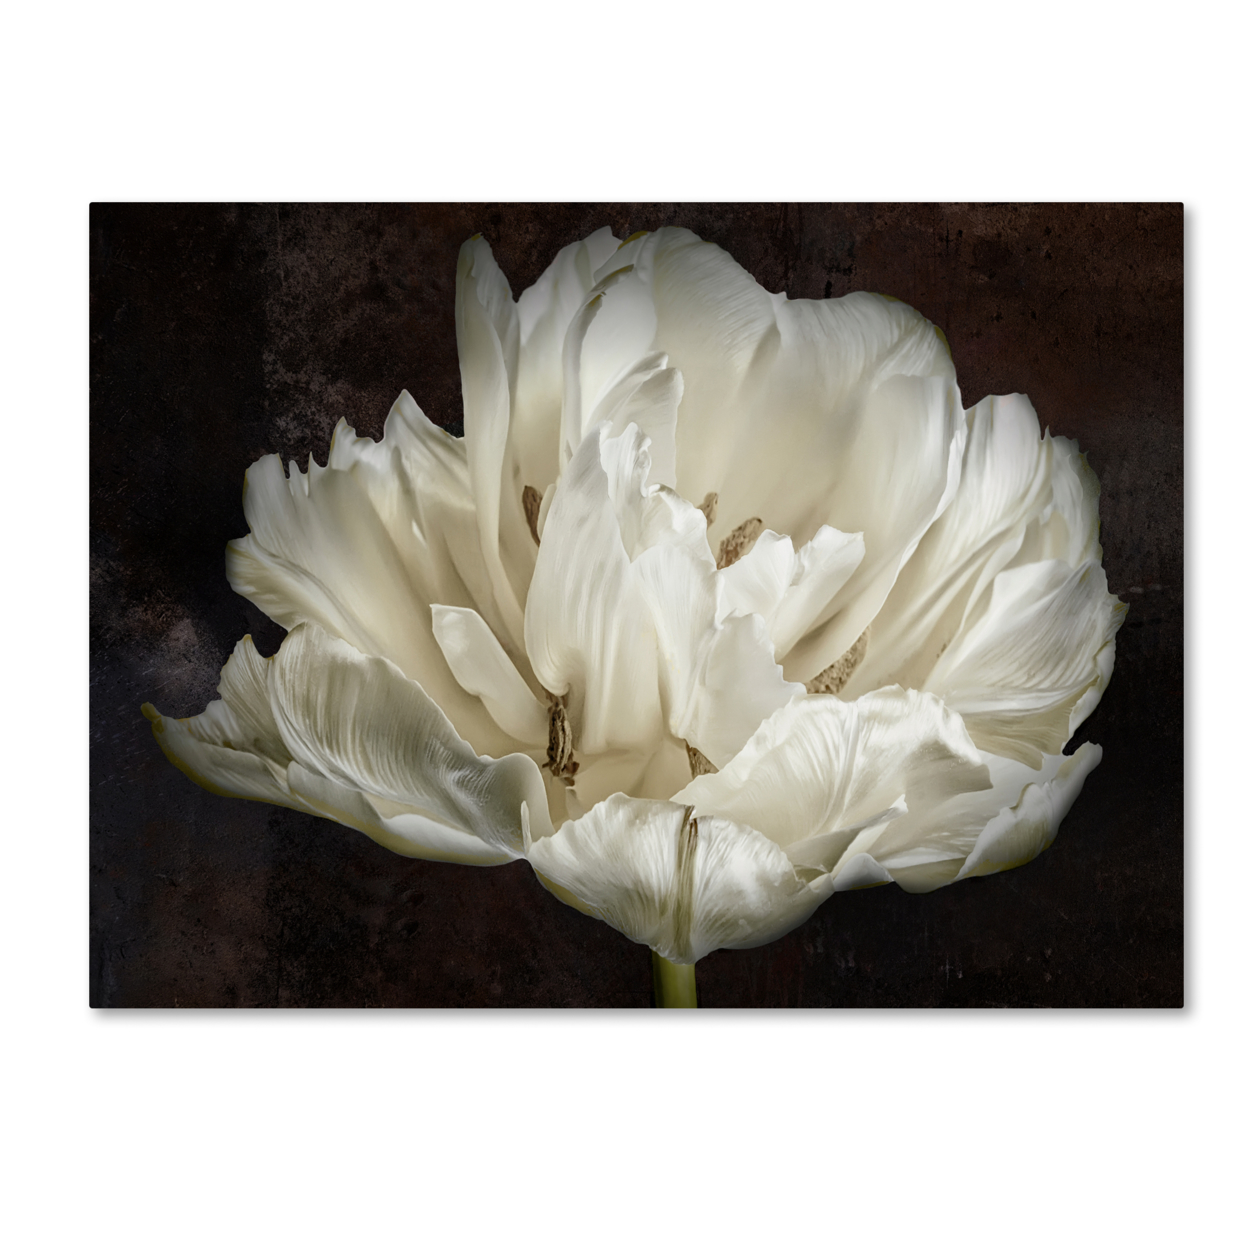 Cora Niele 'Double White Tulip' Canvas Wall Art 35 X 47 Inches